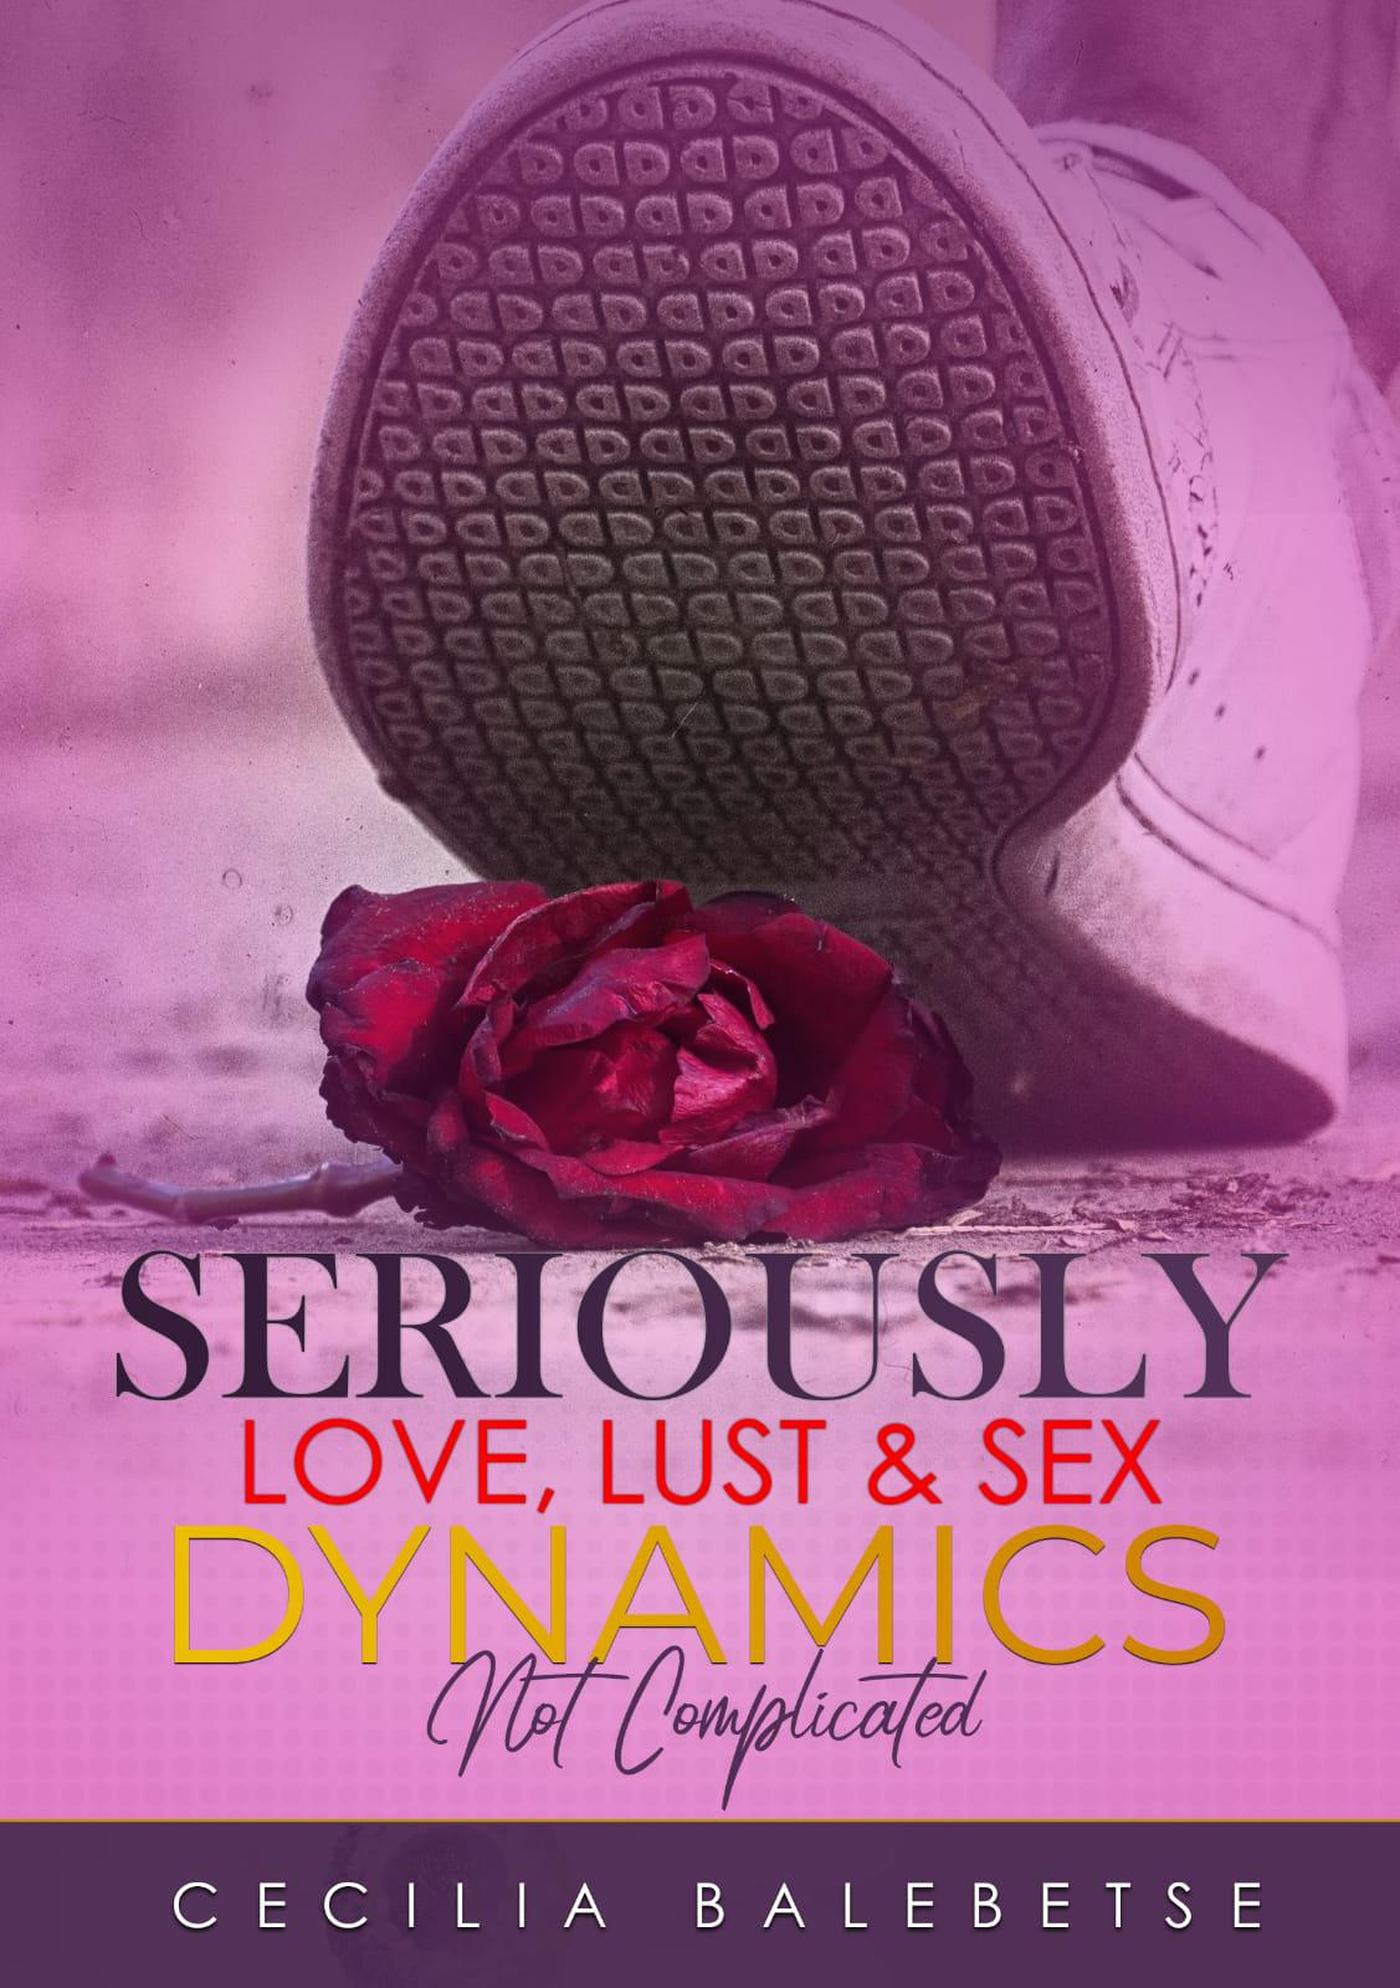 Smashwords Seriously Love Lust And Sex Dynamics A Book By Cecilia